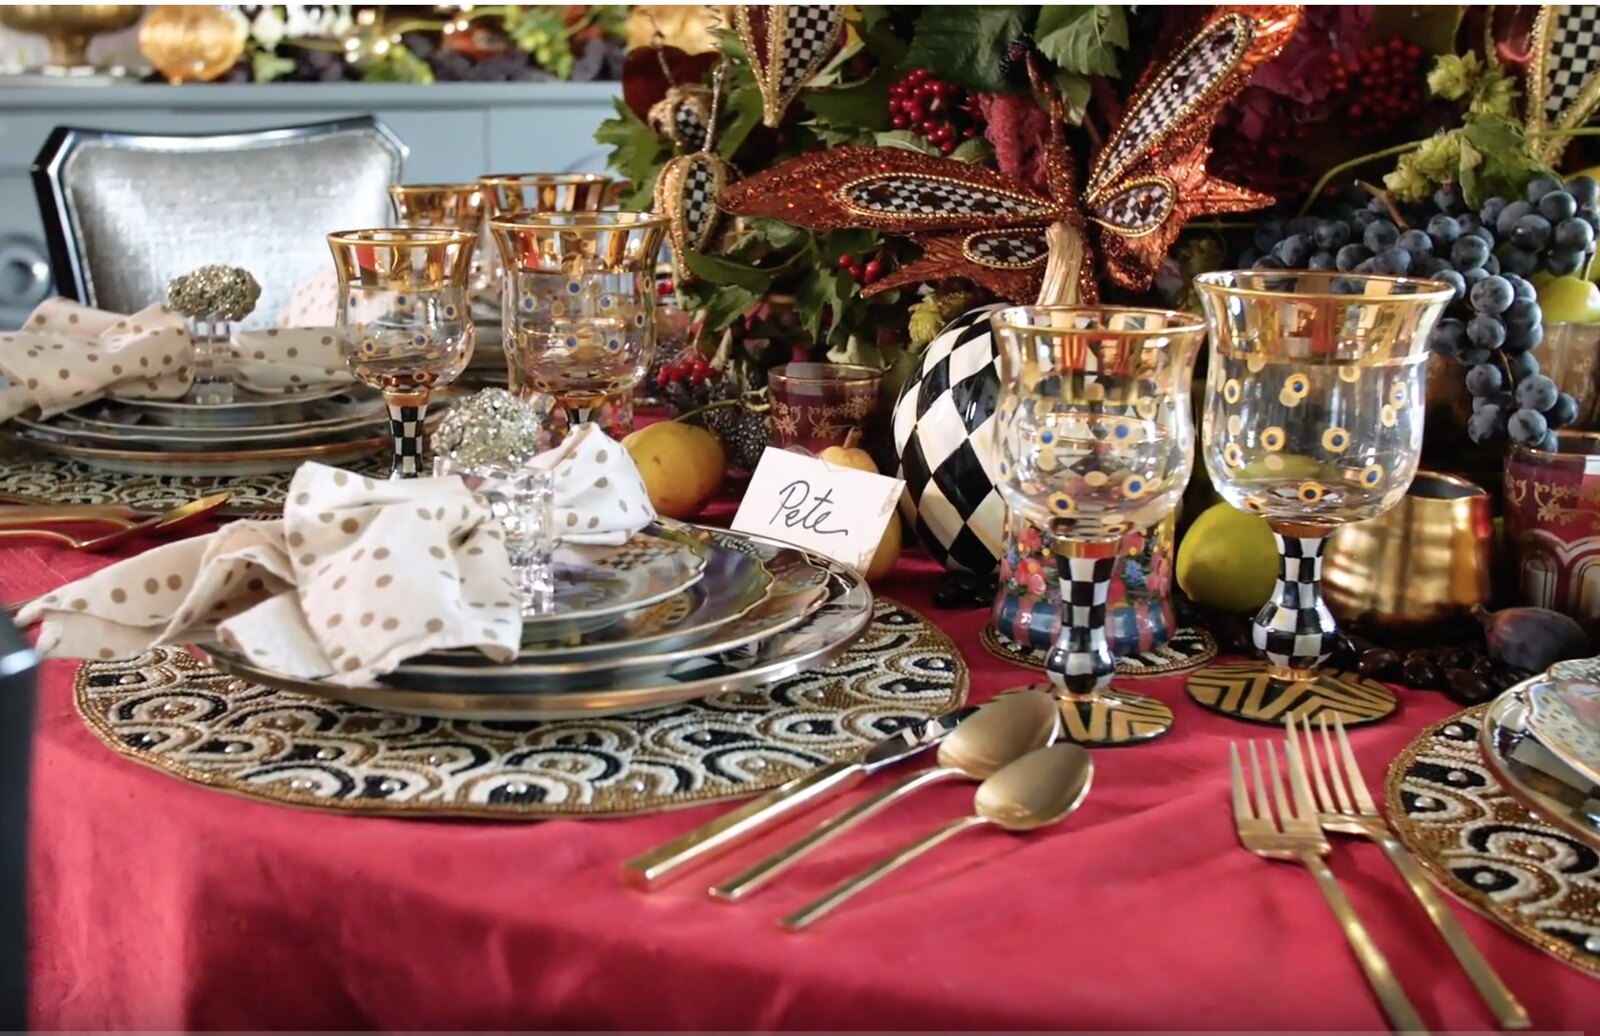 How To set a formal table